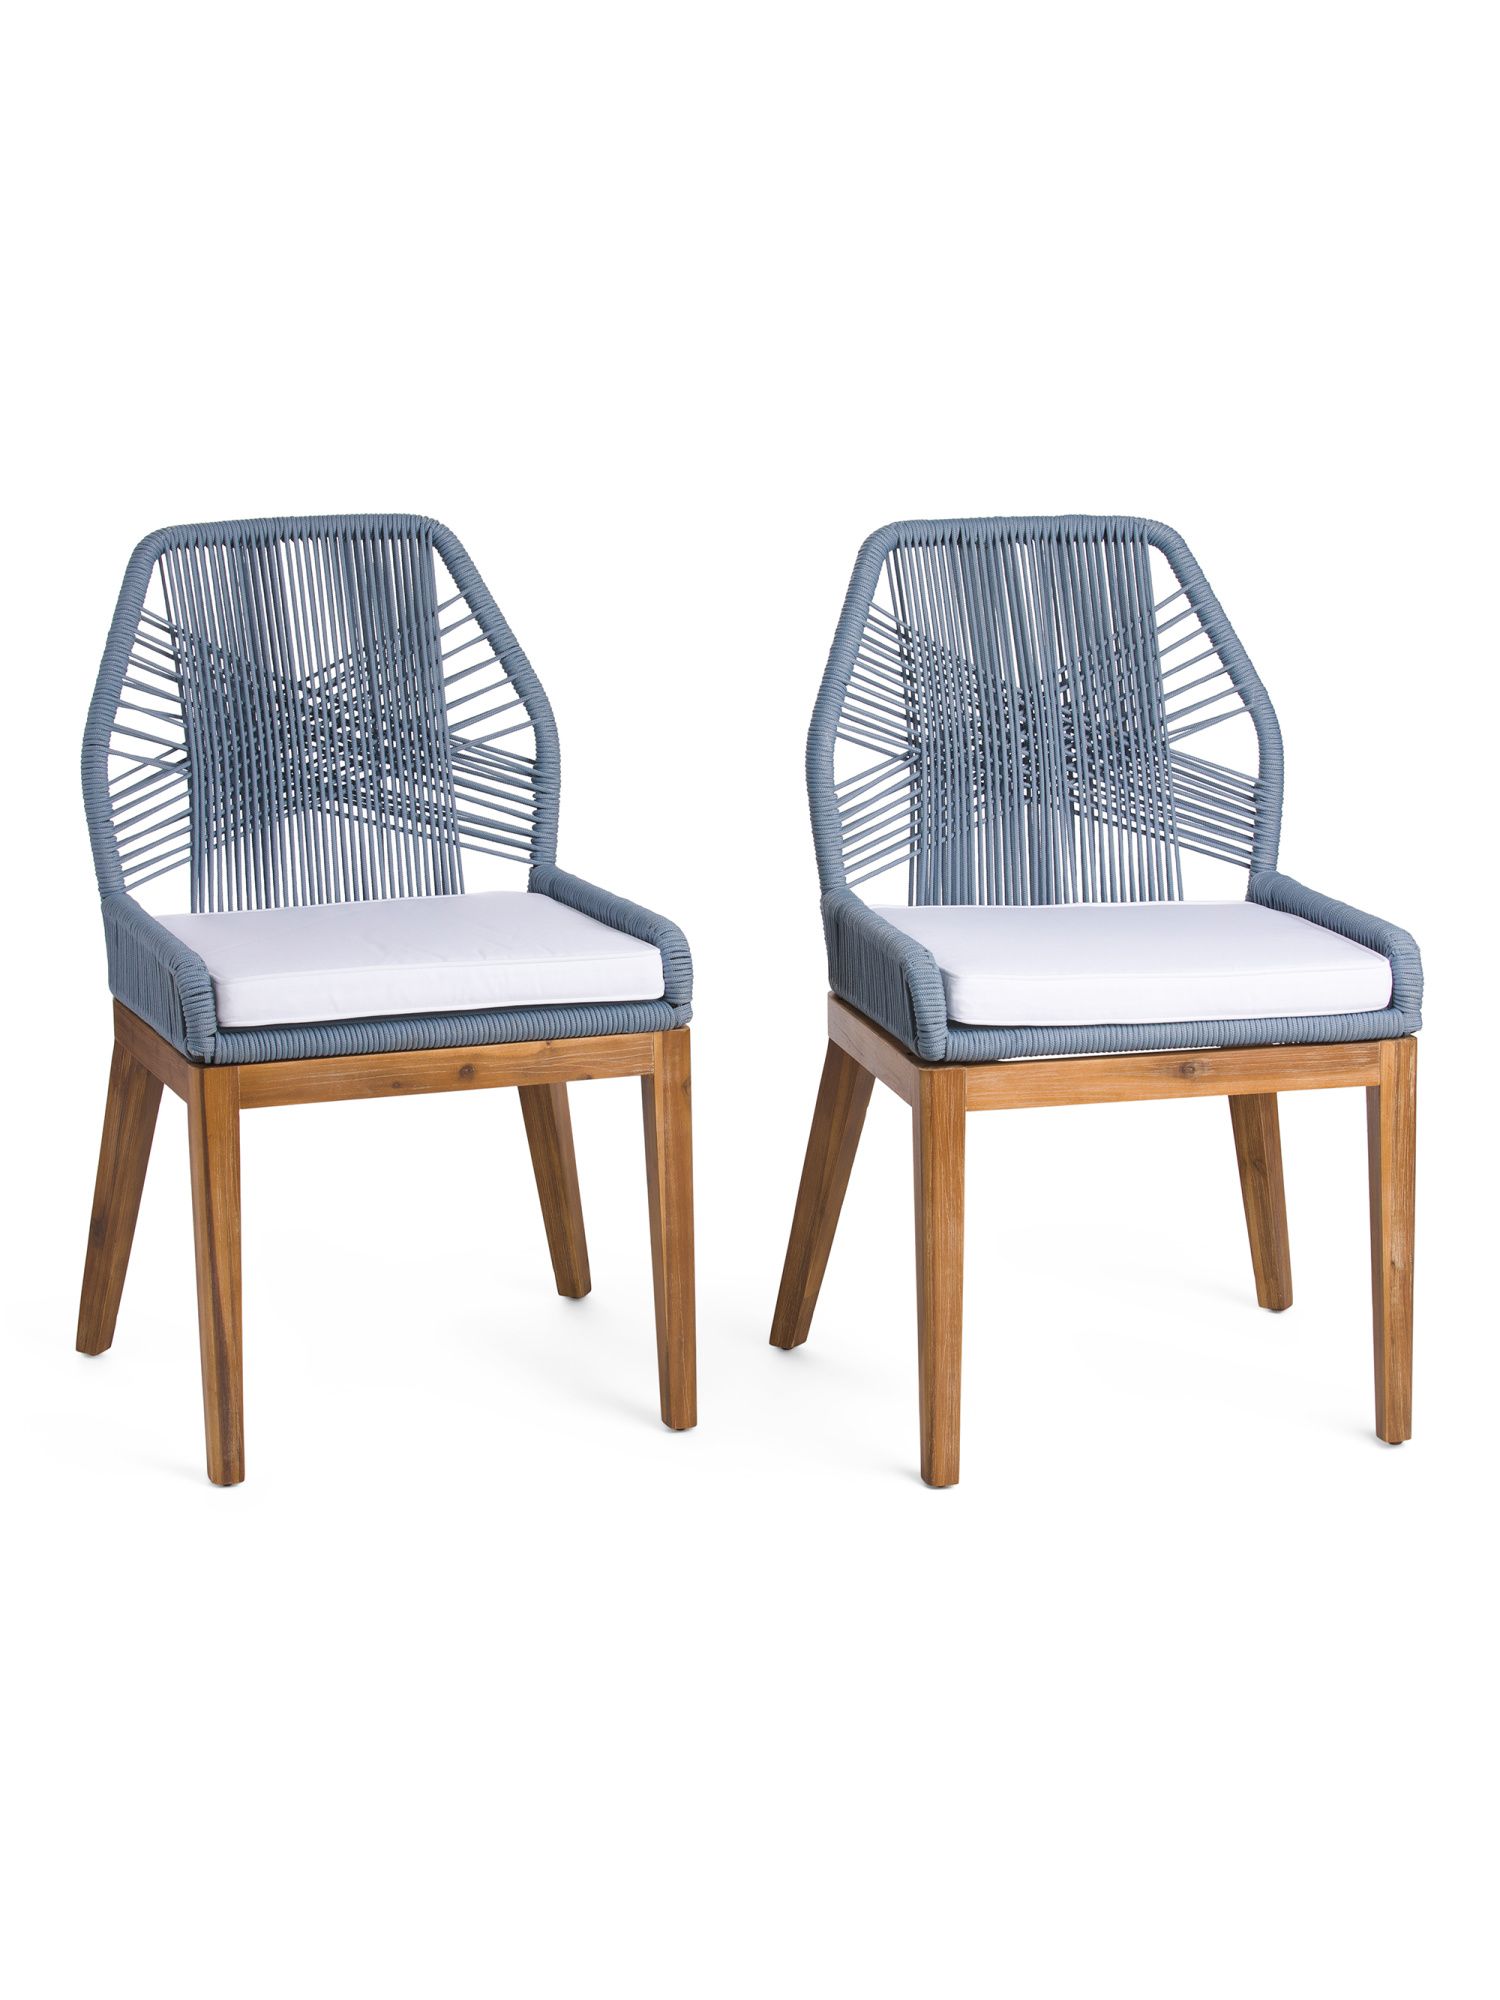 Set Of 2 Rope Crossweave Side Chairs With Cushions | Kitchen & Dining Room | Marshalls | Marshalls